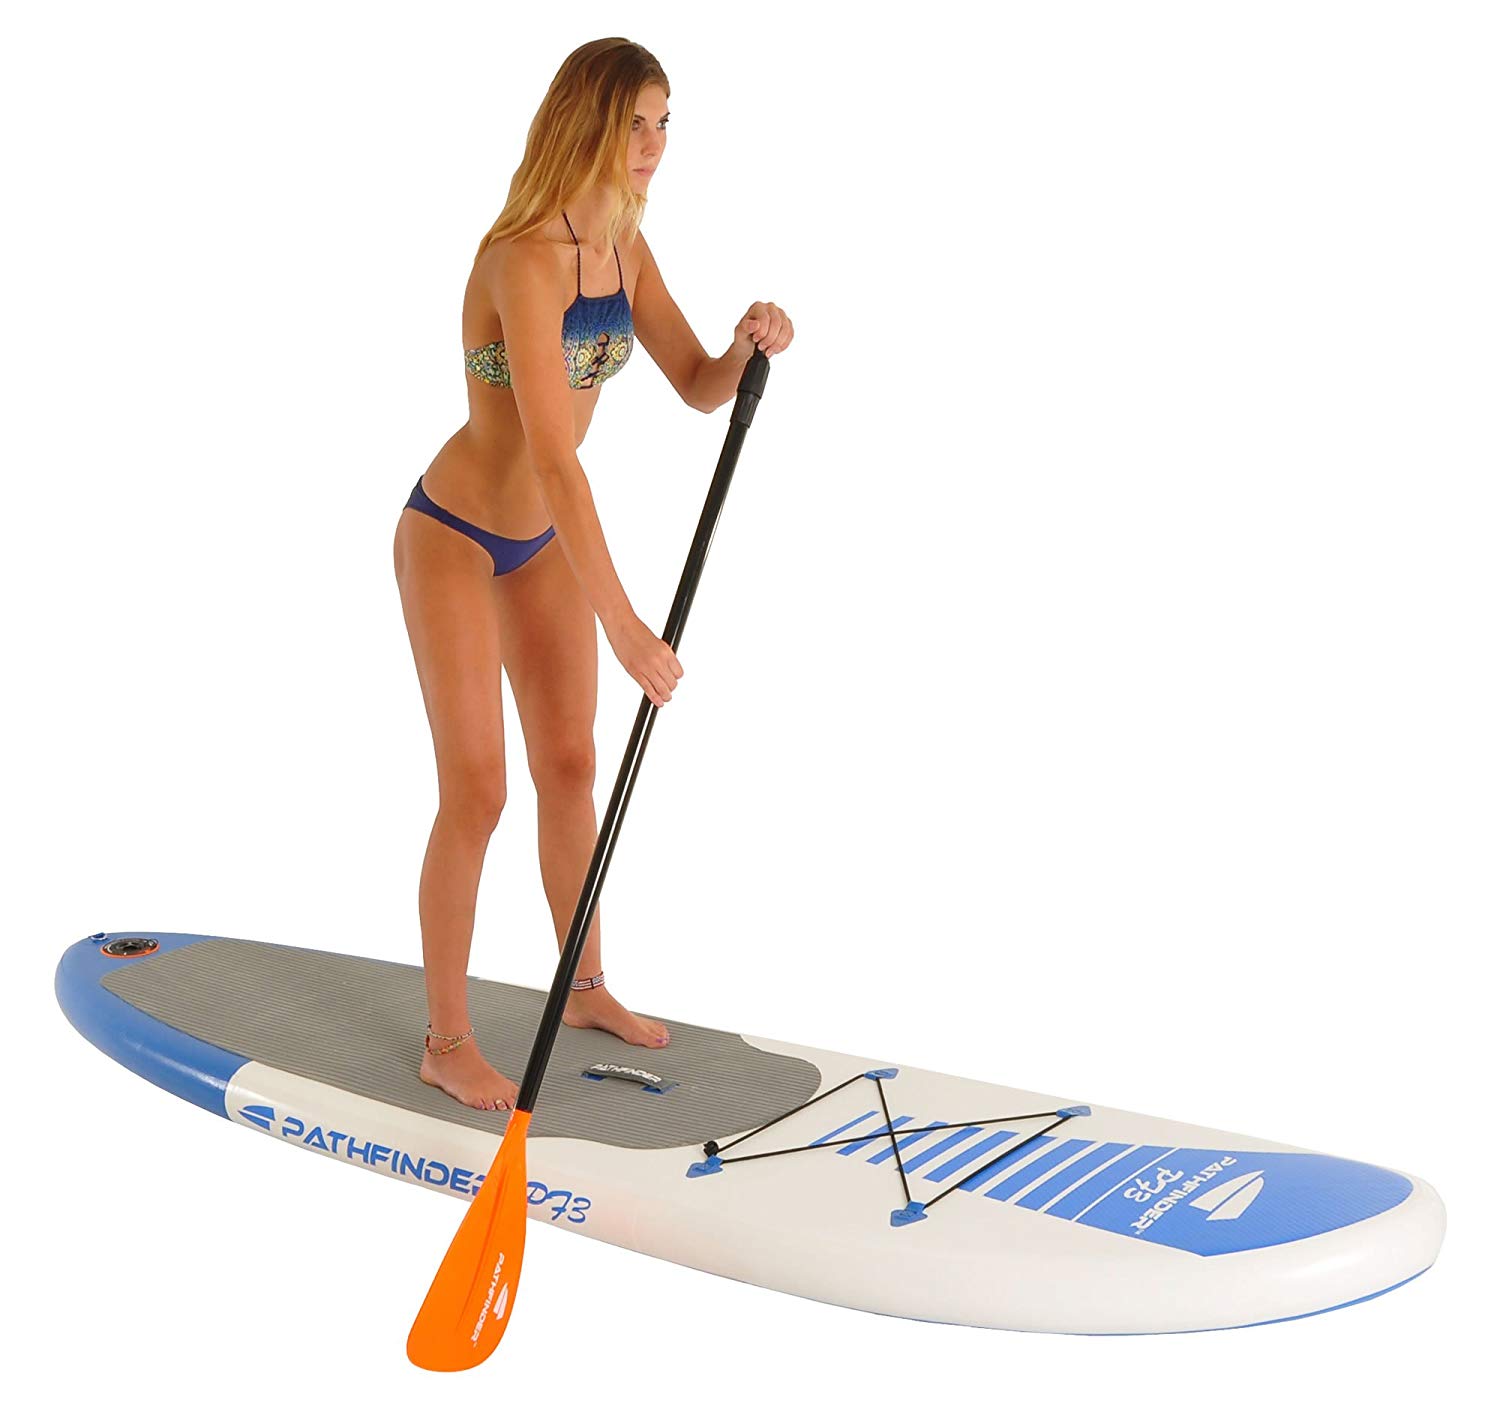 PathFinder Inflatable SUP Stand Up Paddleboard.jpg